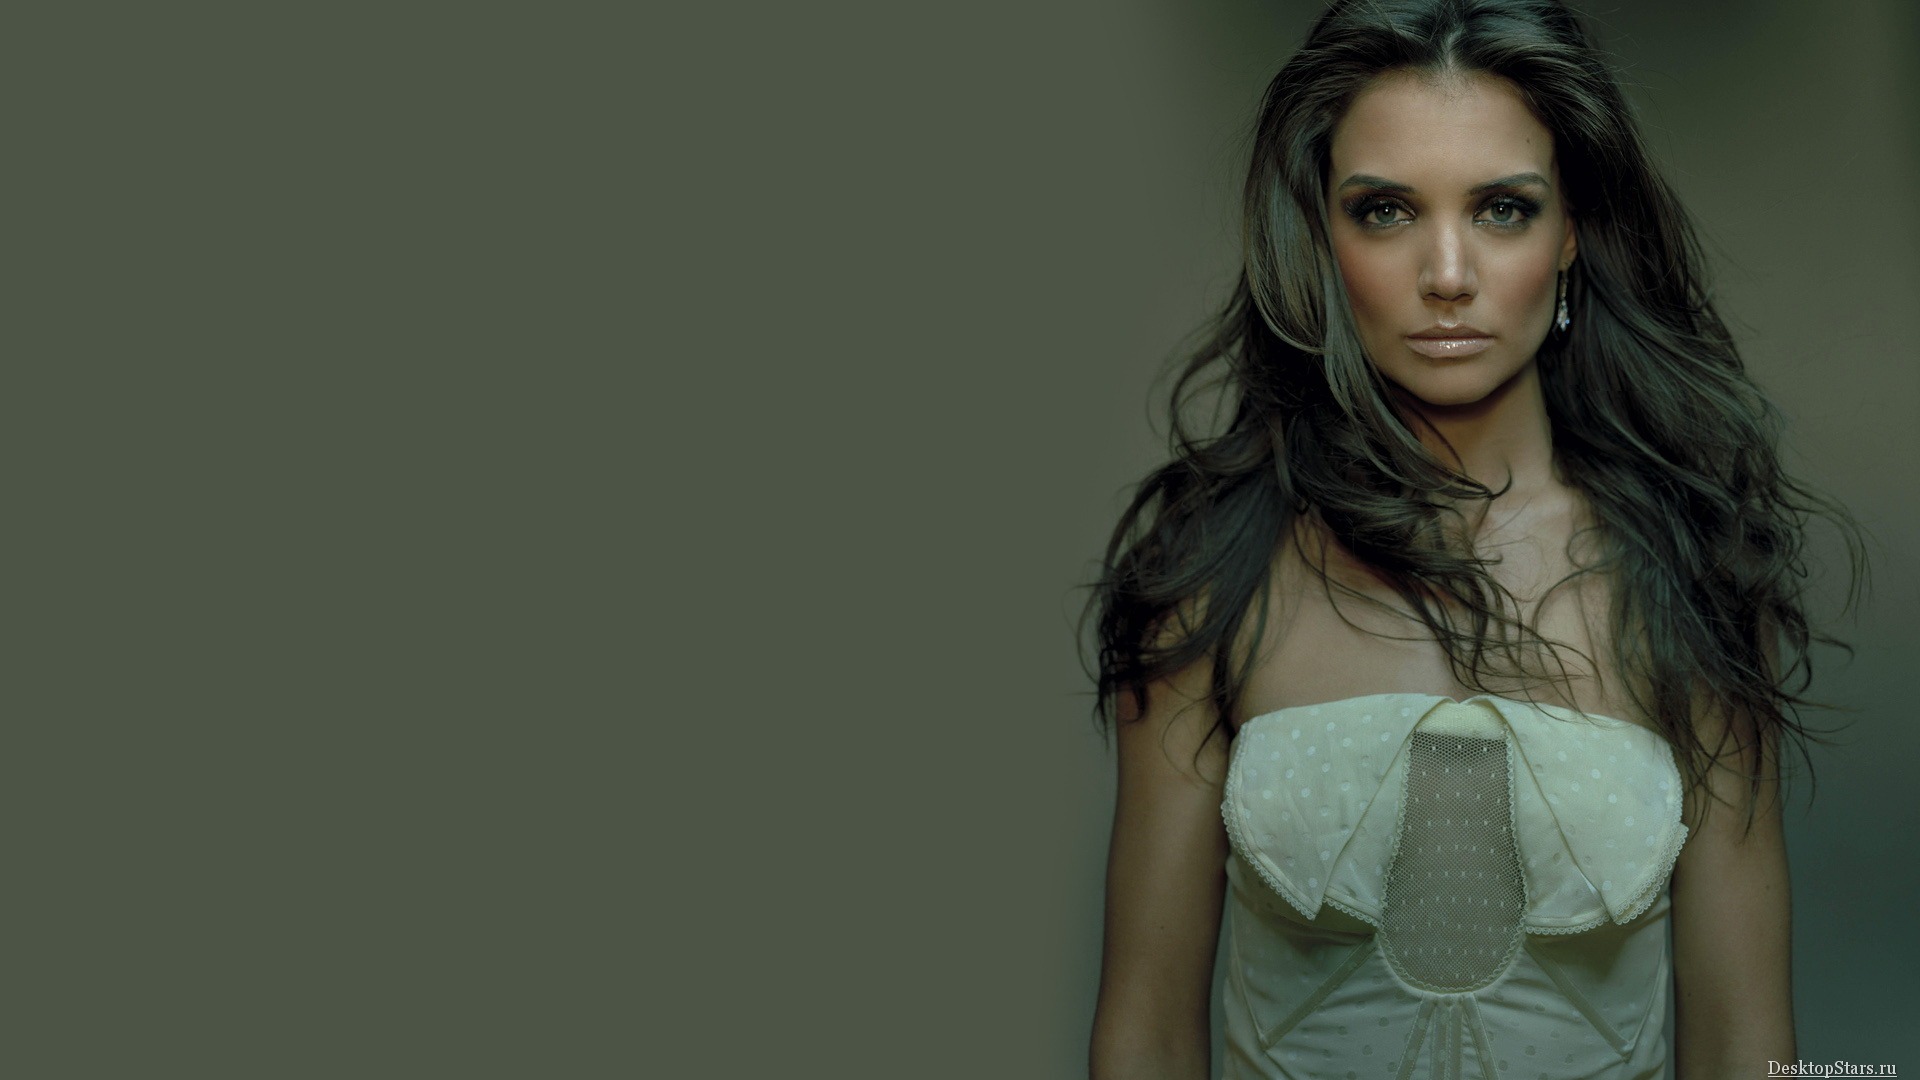 Katie Holmes #023 - 1920x1080 Wallpapers Pictures Photos Images